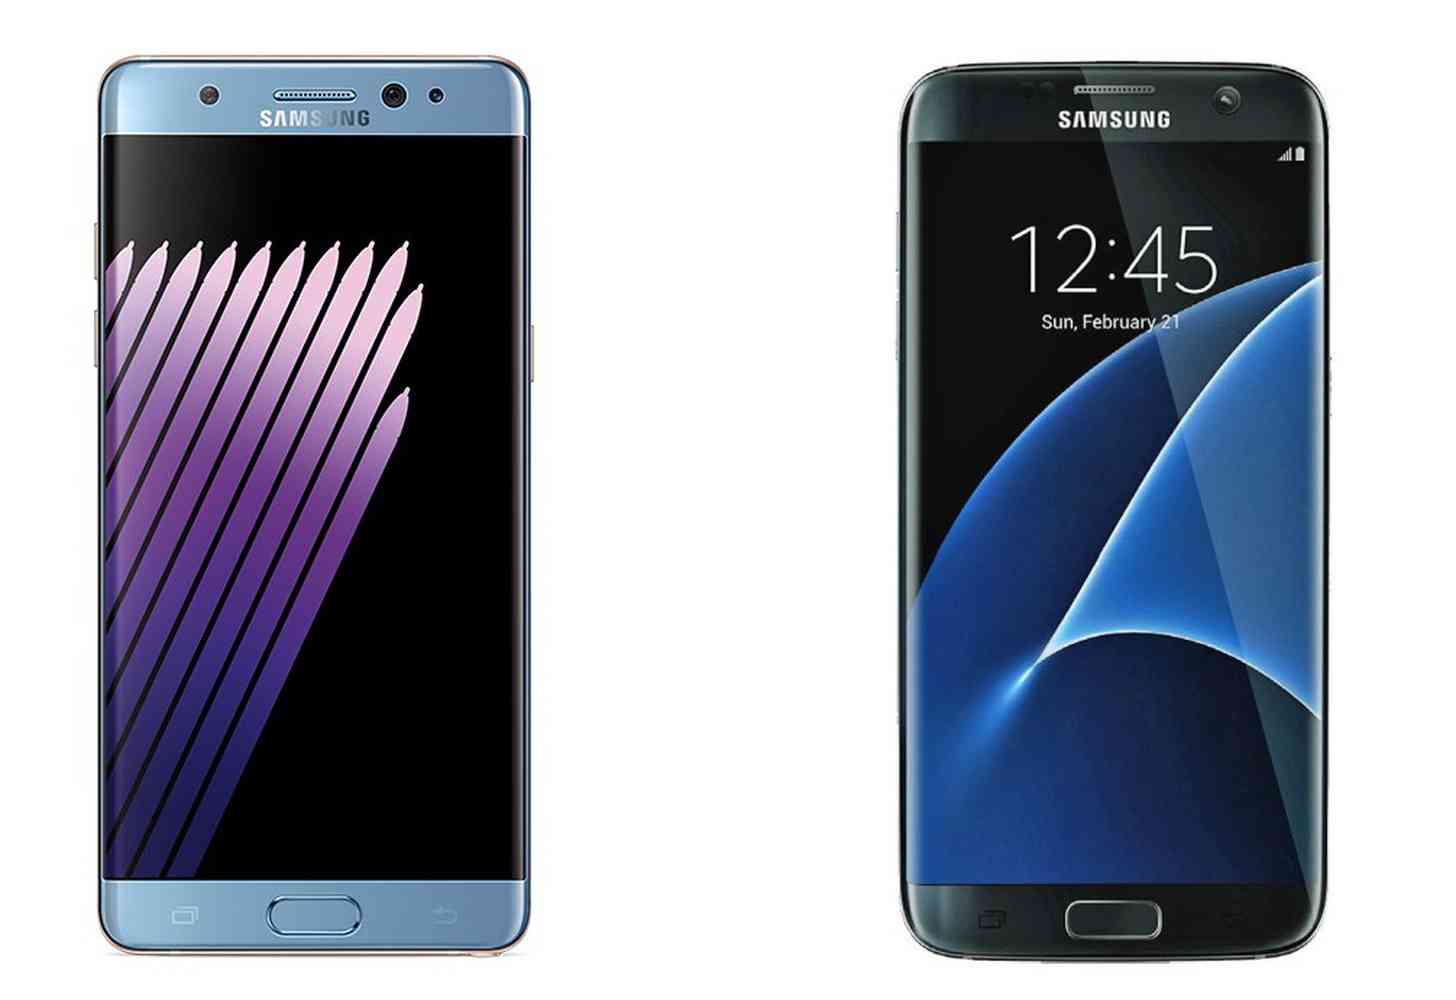 Samsung Galaxy Note 7 and S7 edge